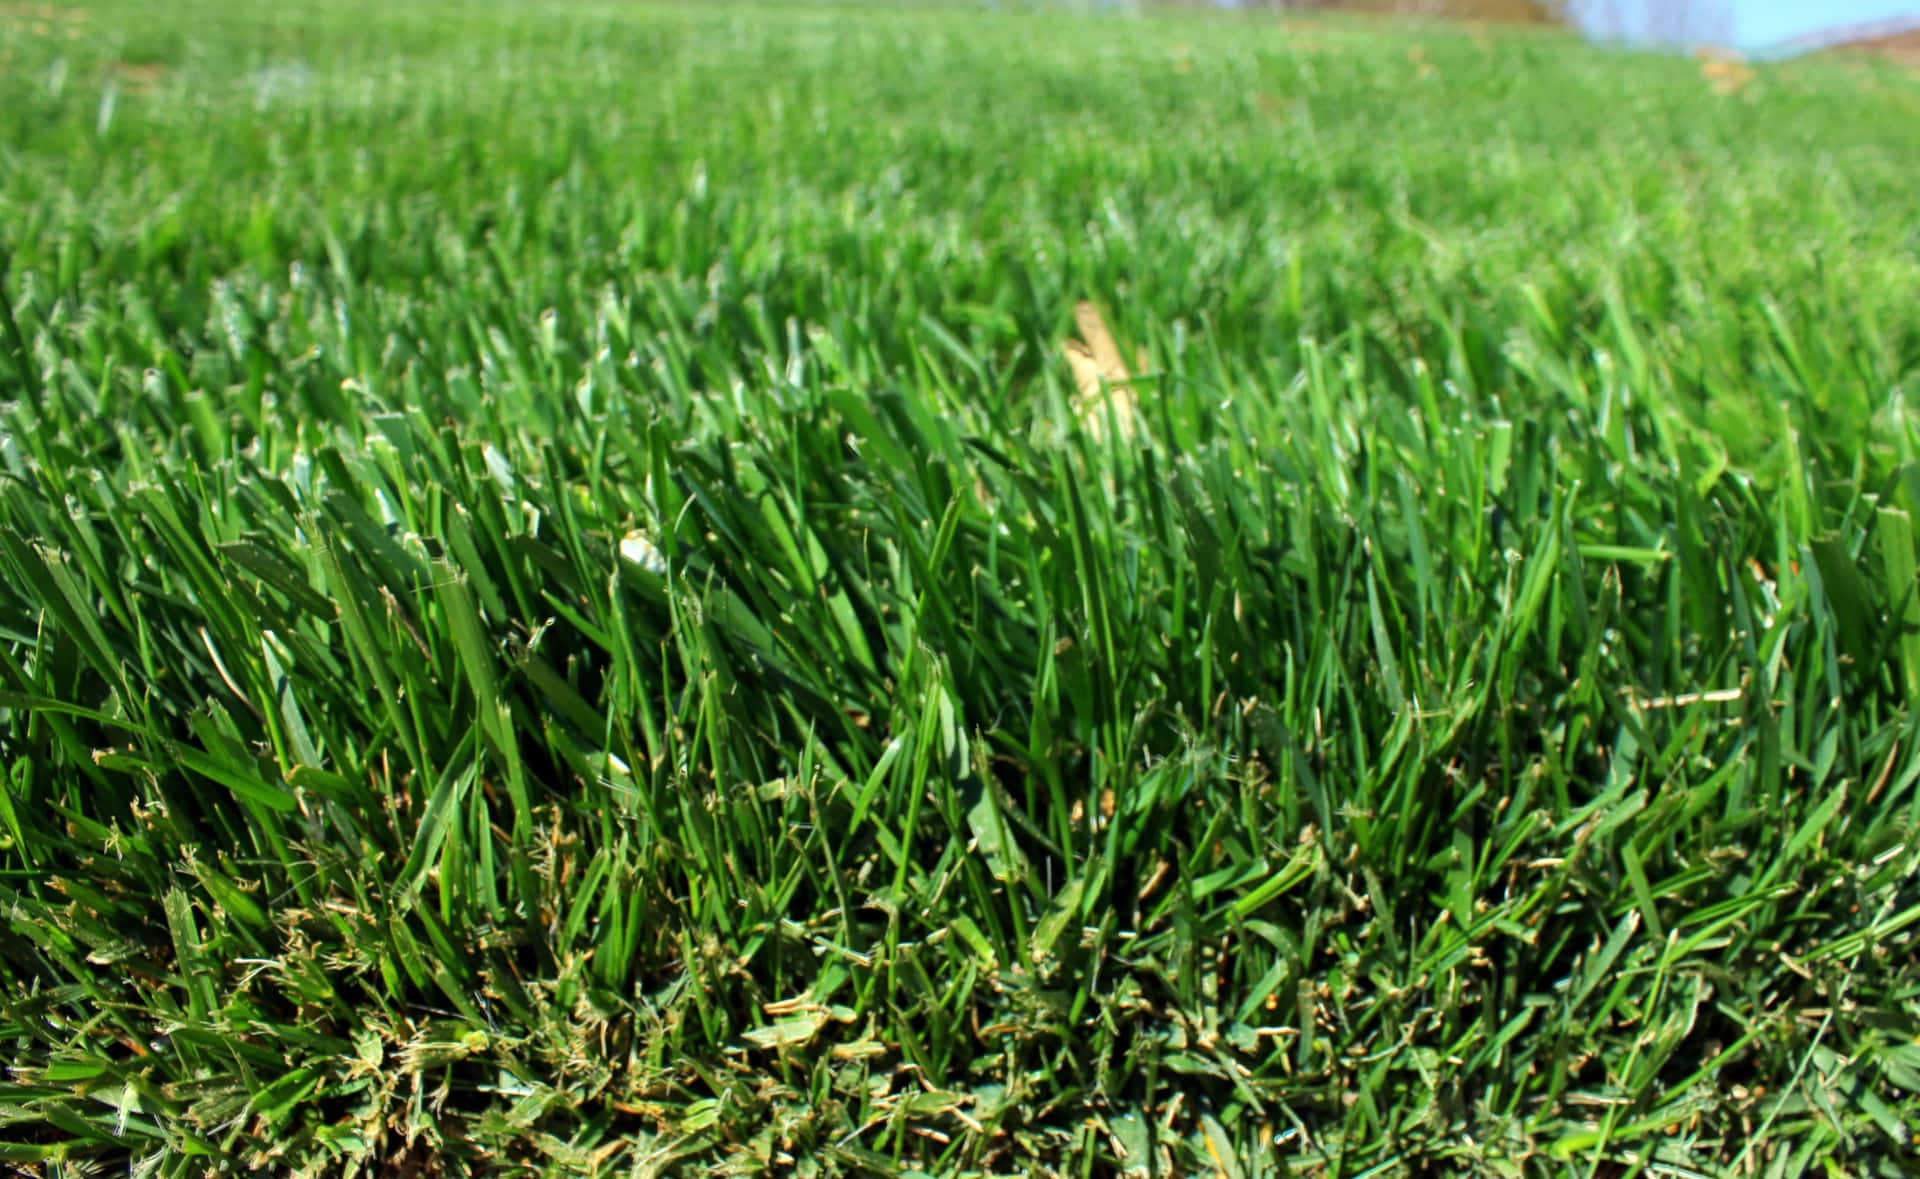 Close-up of a grass texture with small blades and a vibrant green color